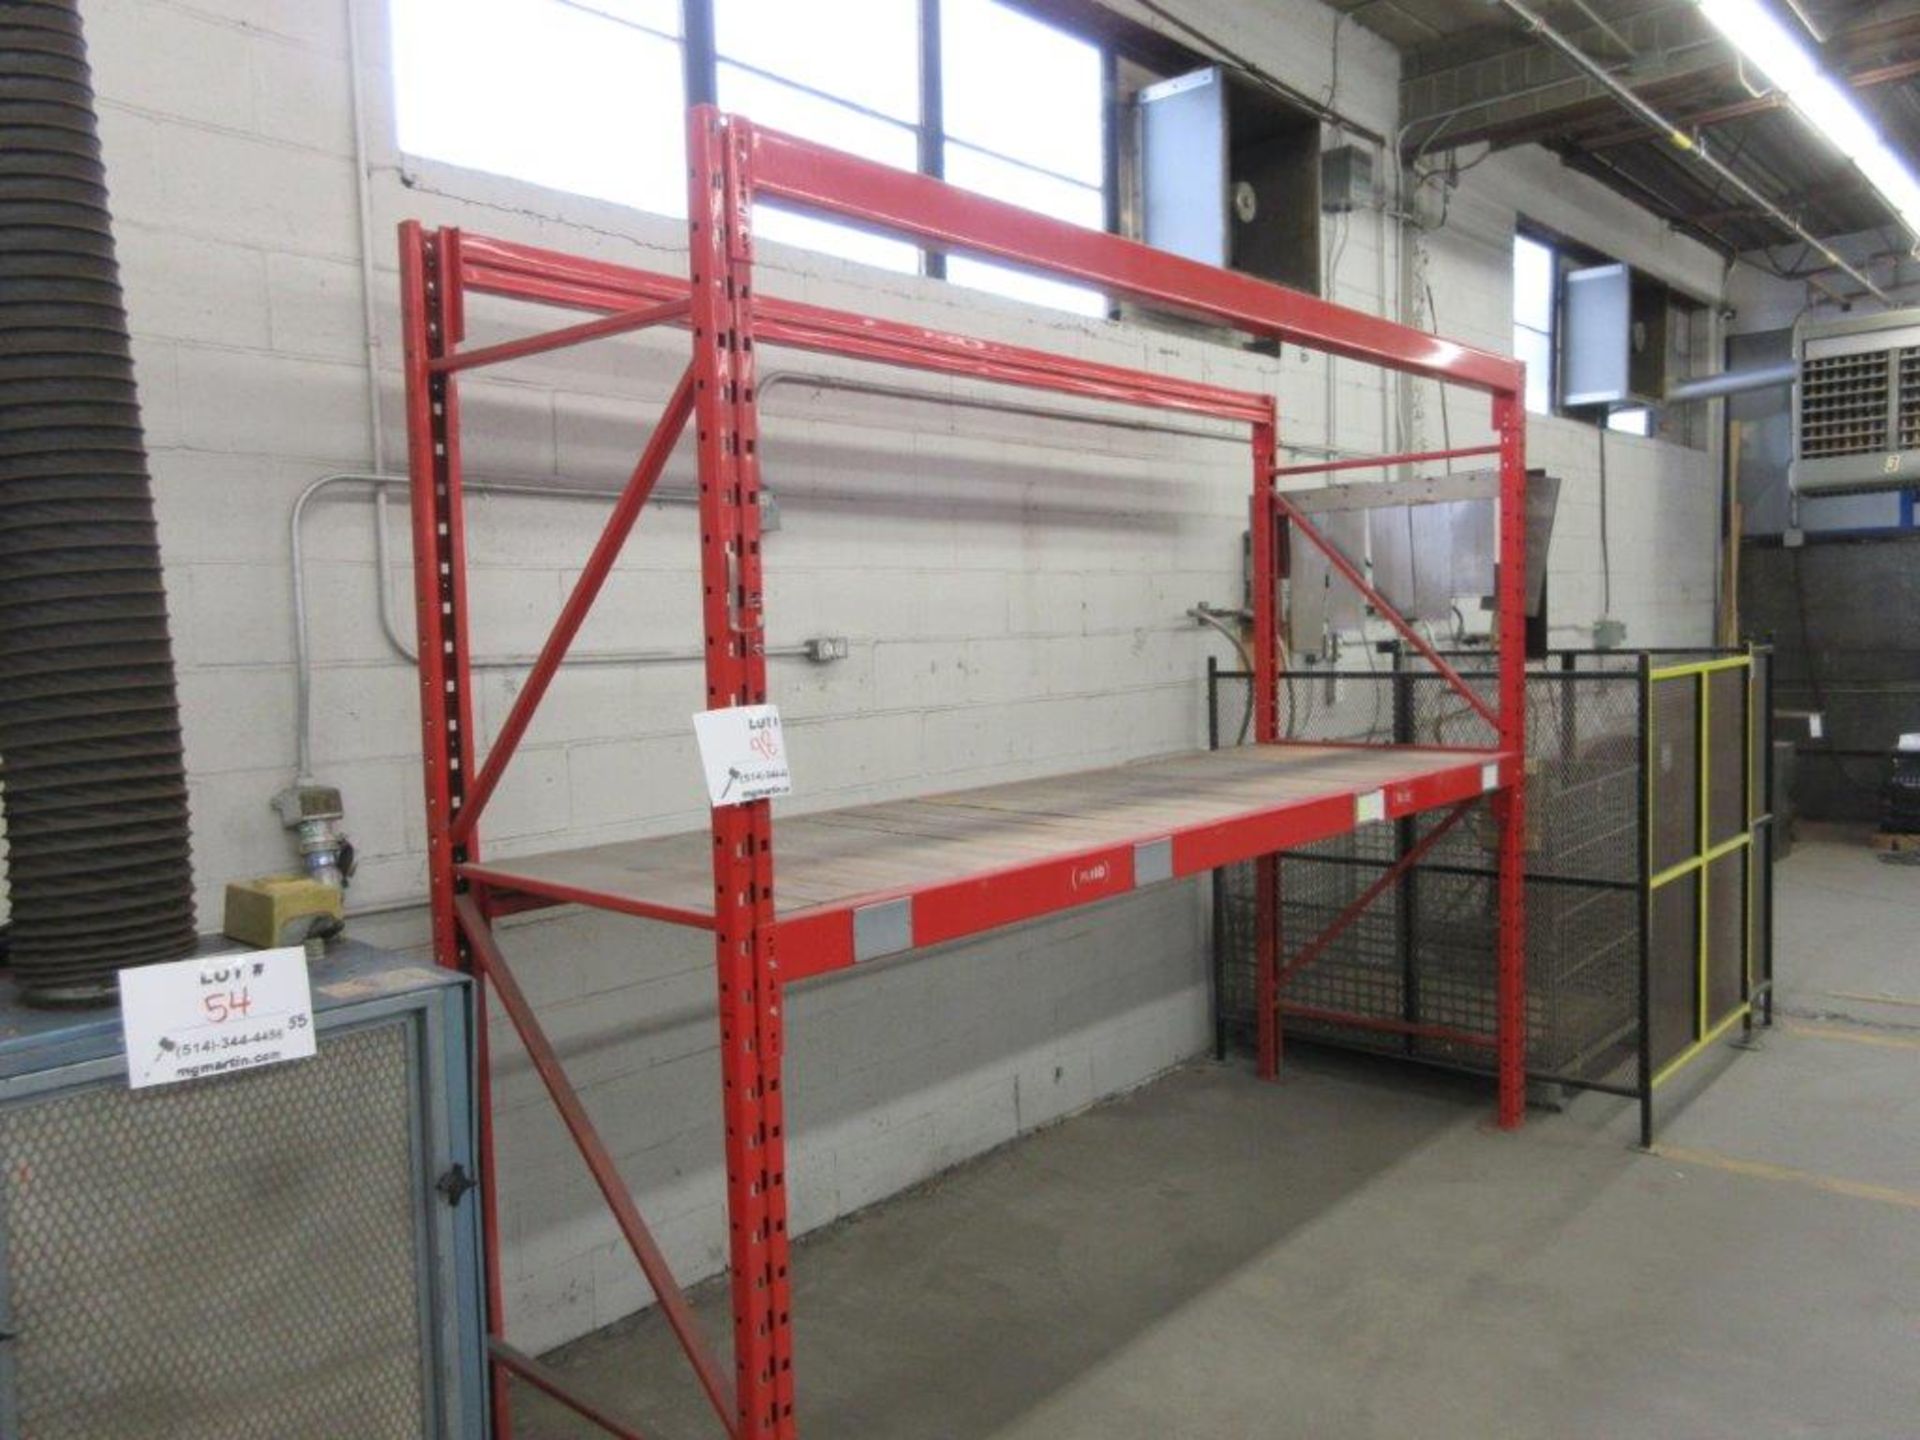 Sections industrial racking 79w x 41d x 8ft h / 105w x 34d x 9ft h/ 127w x 36d x 8ft h / 127w x - Image 2 of 3